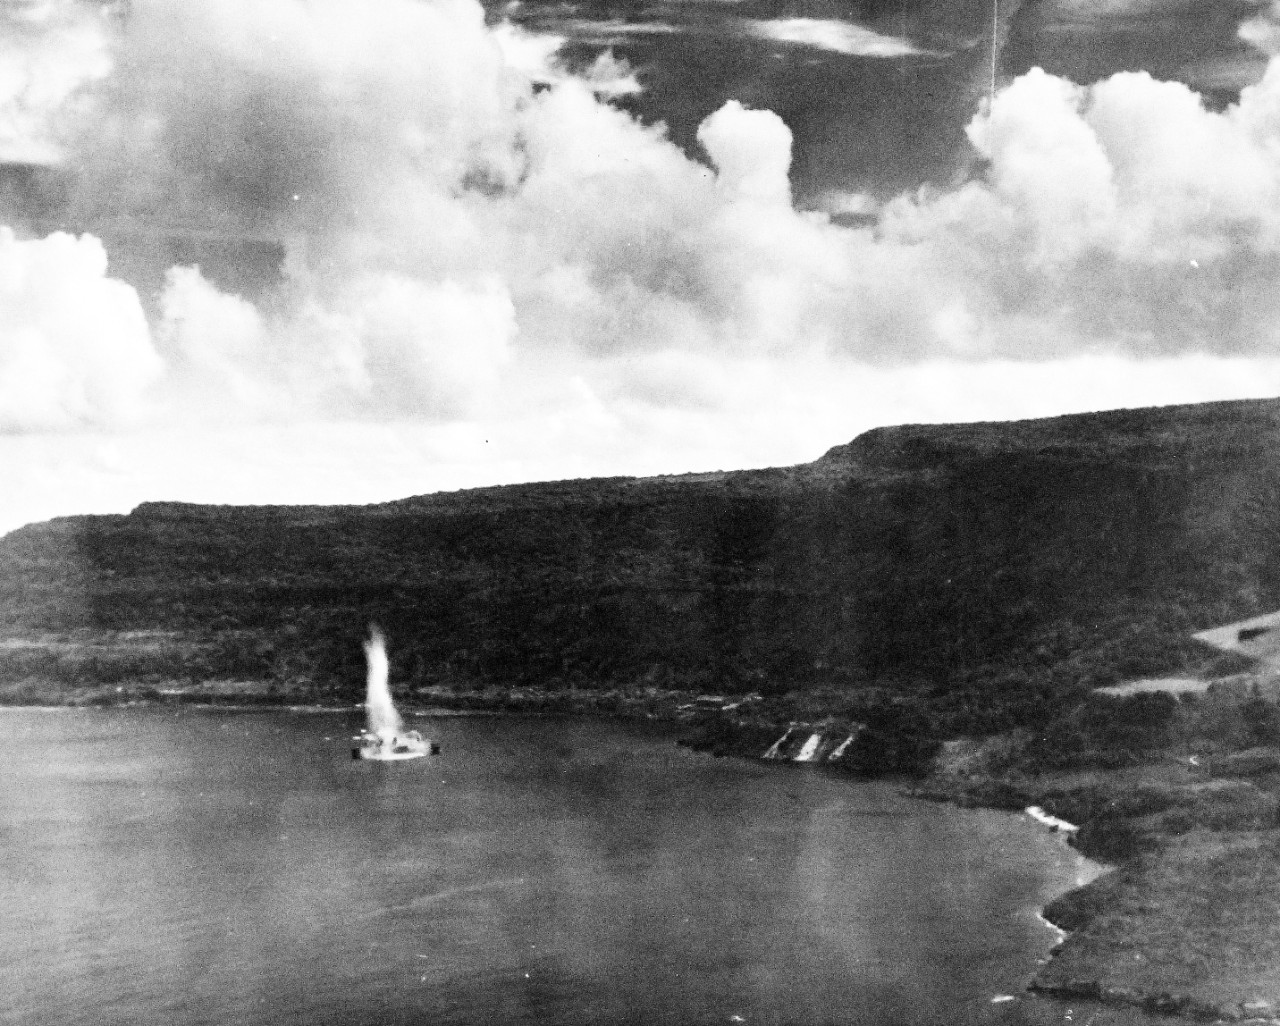 80-G-384151:   Invasion of Saipain, June-July 1944.   Sinking of Japanese transport off Rota Island, Mariana Islands.  Photographed by plane from USS White Plains (CE 66), June 24, 1944.  Official U.S. Navy Photograph, now in the collection of the National Archives.   (2015/3/4).